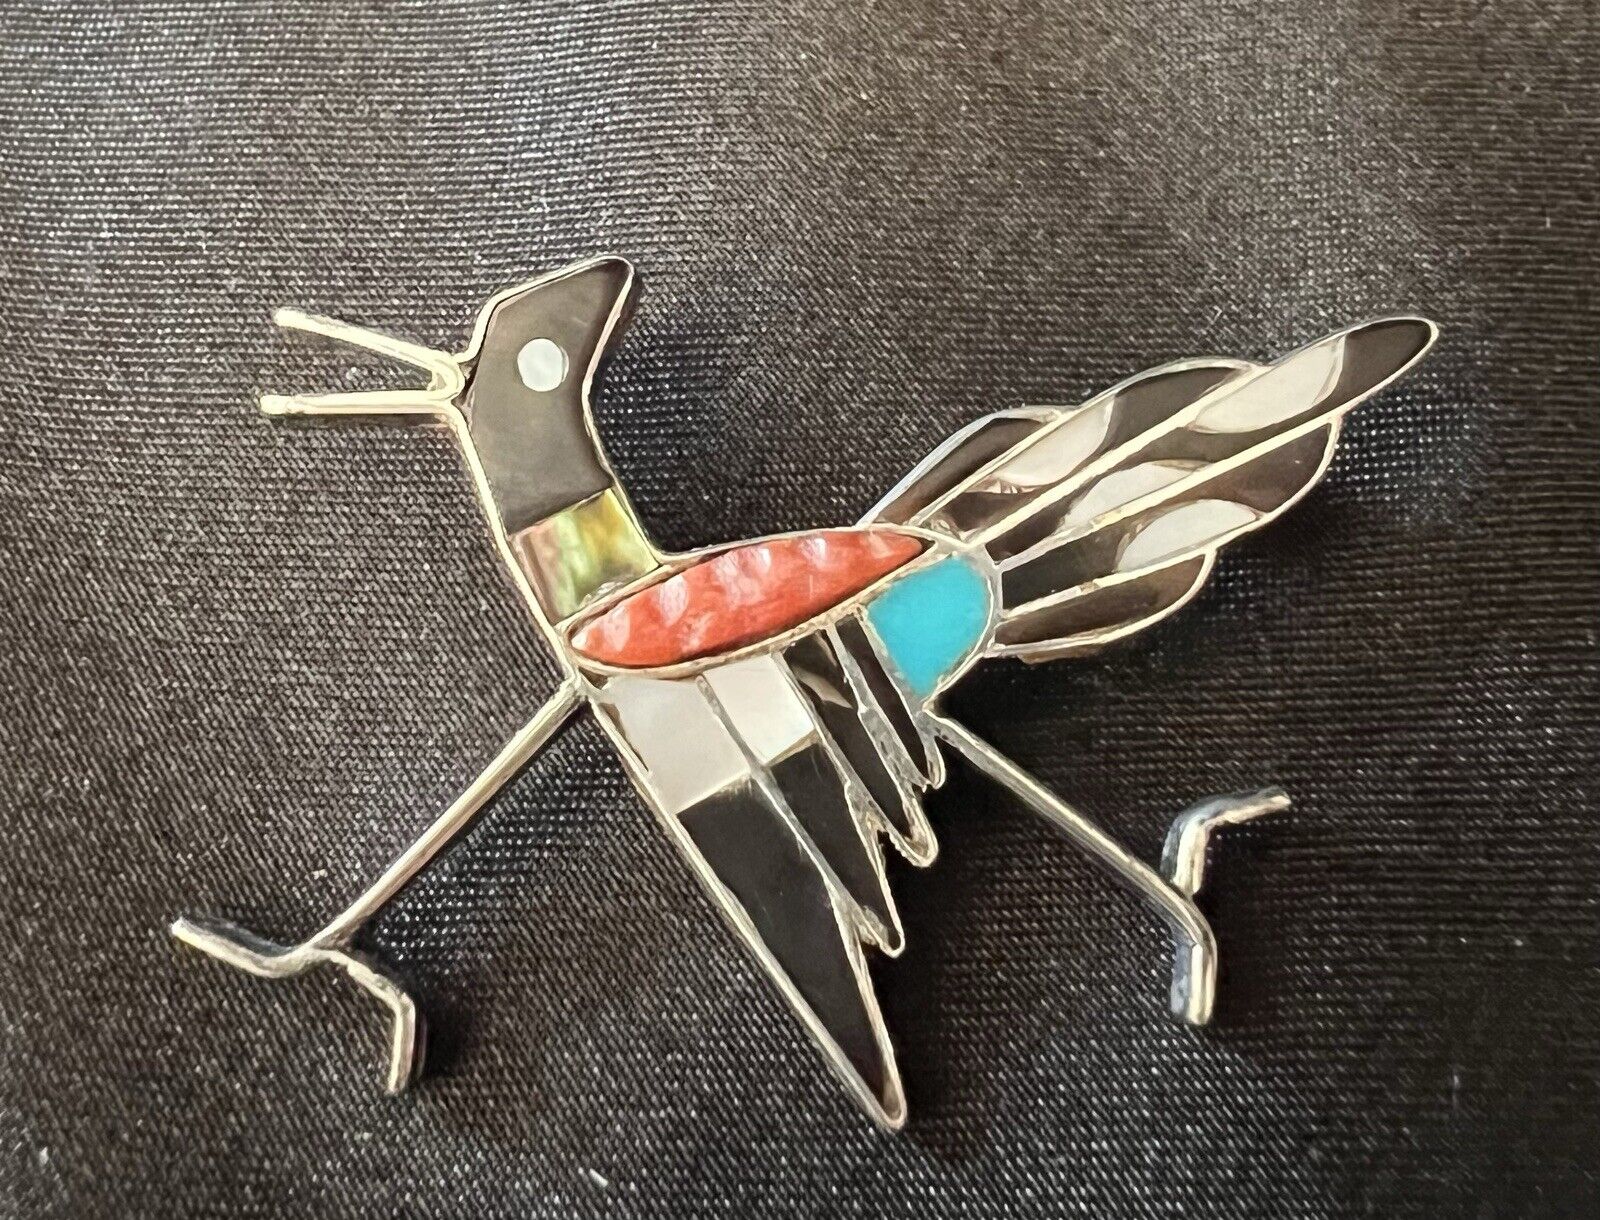 Vintage Zuni Inlay Roadrunner Pin Sterling Turquoise, Coral, Abalone & Onyx